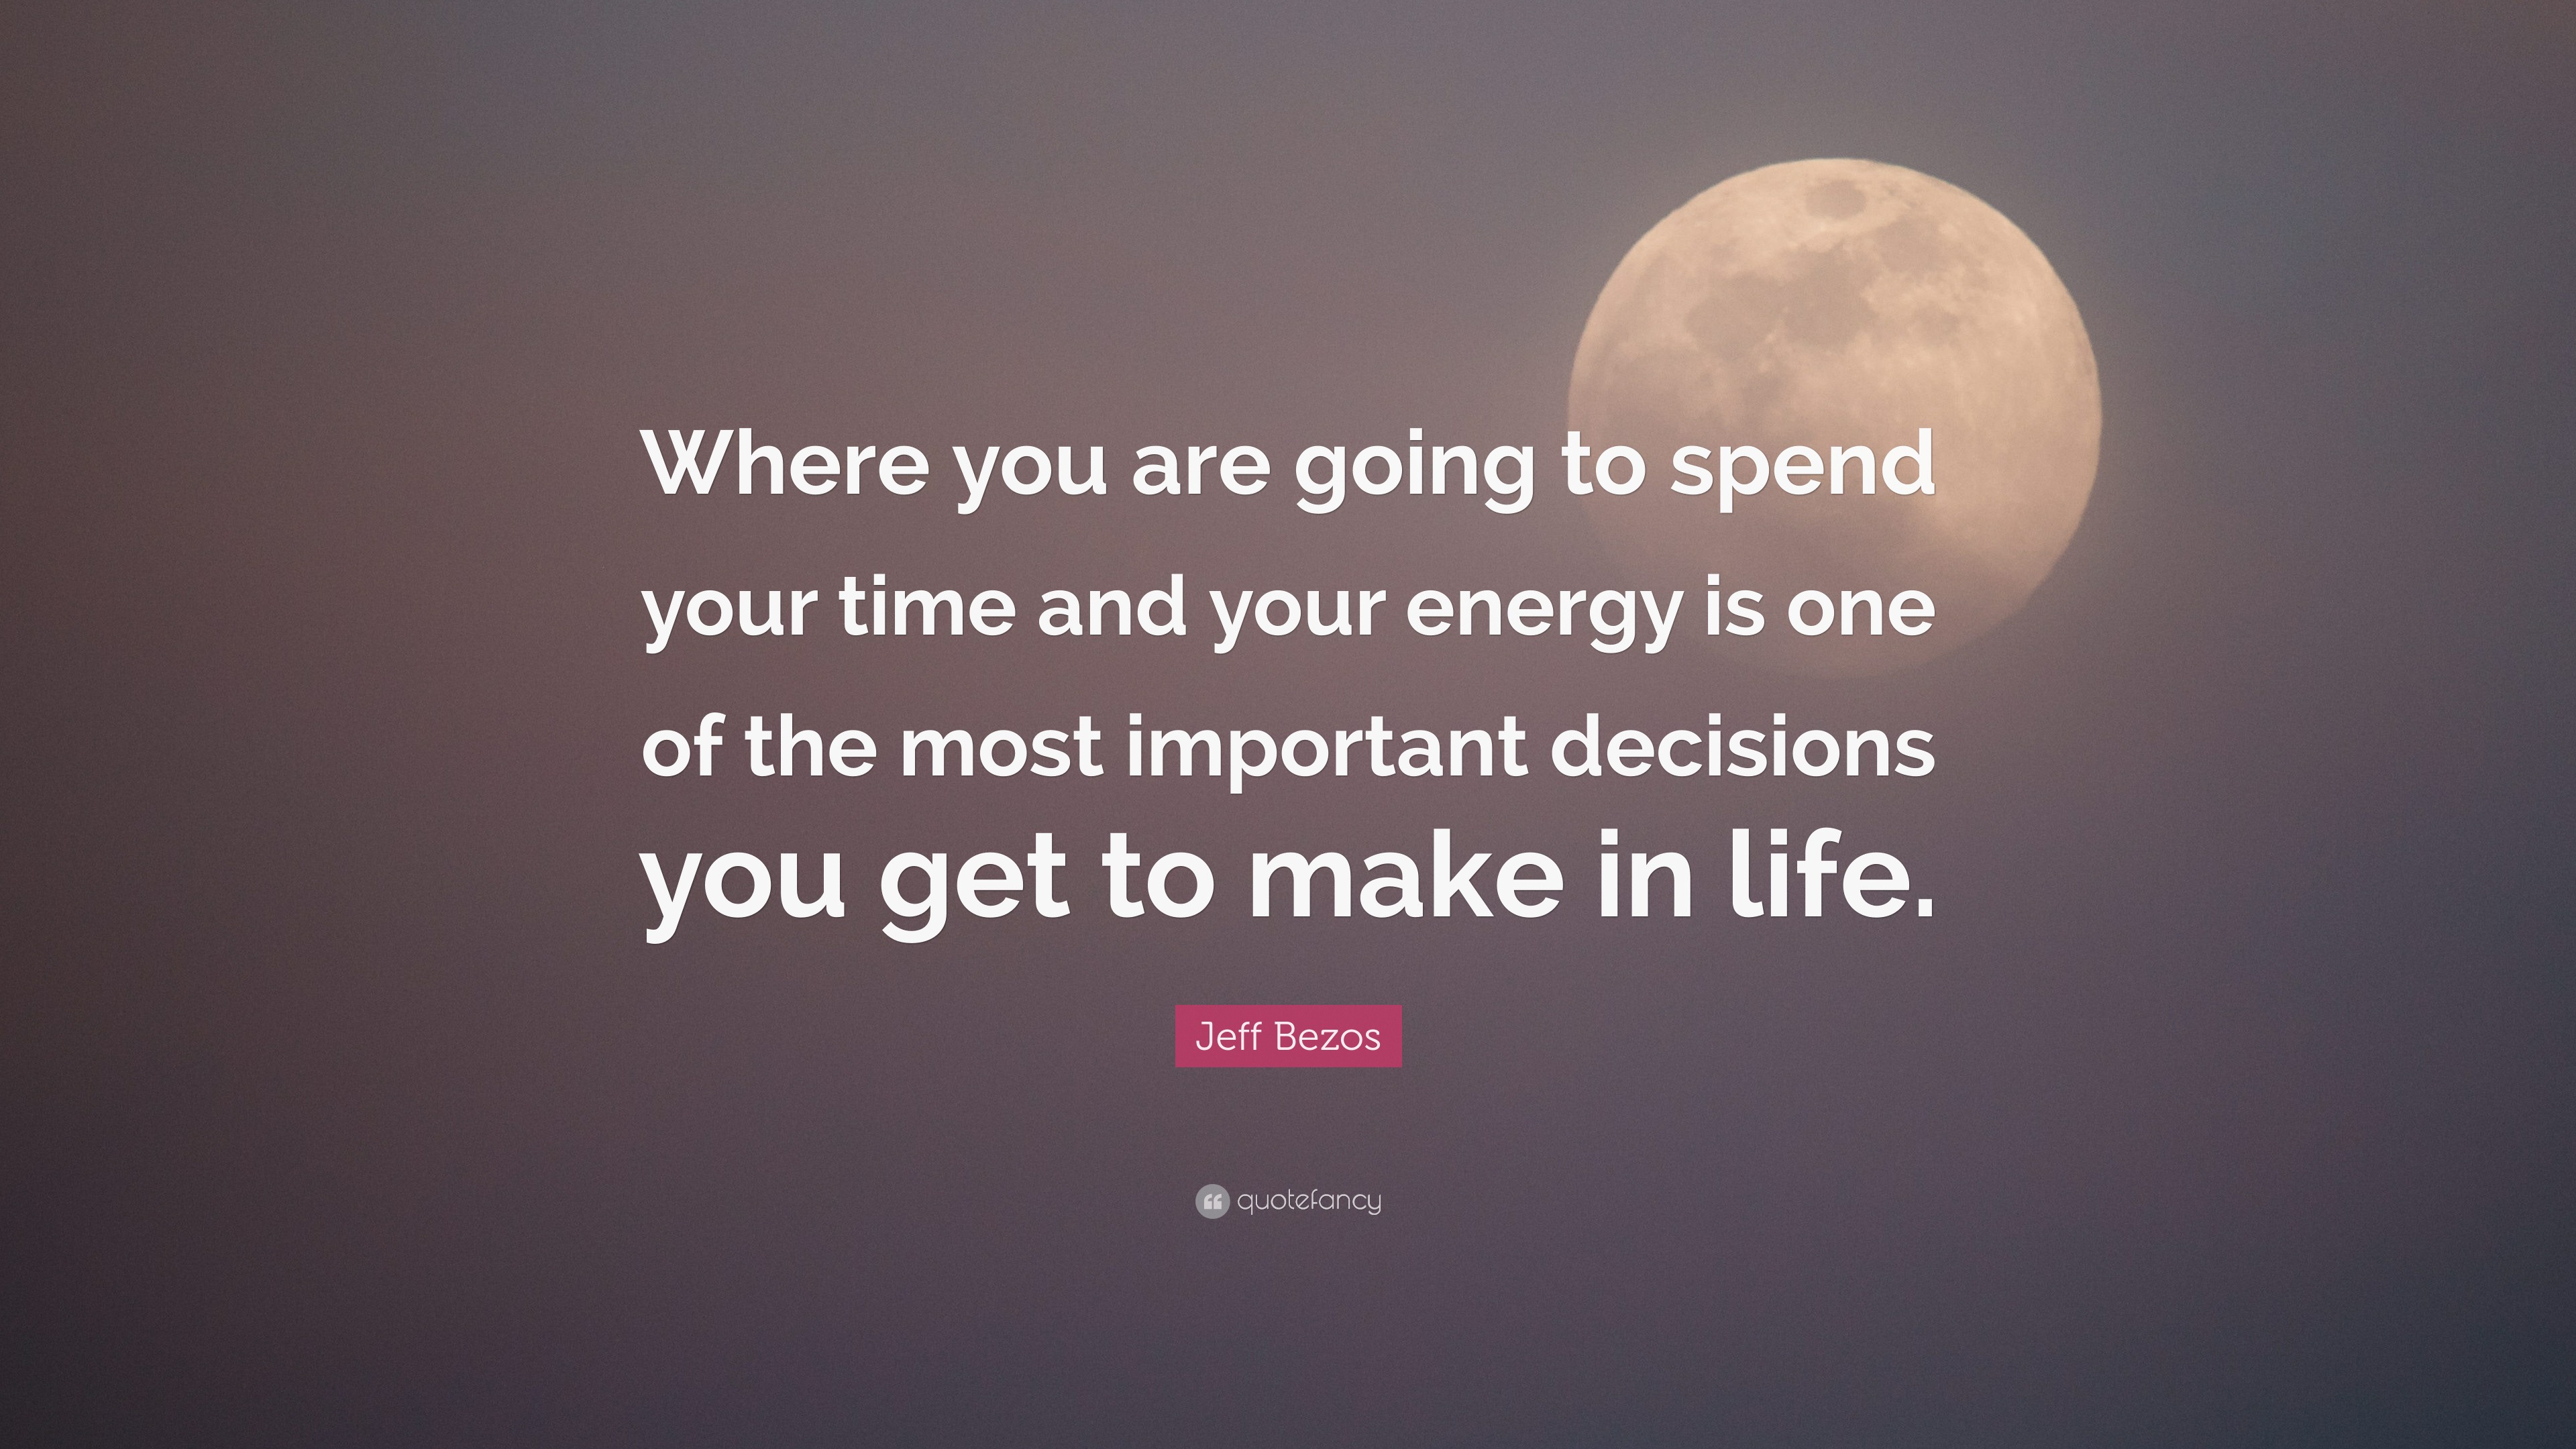 Jeff Bezos Quote: “Where you are going to spend your time and your